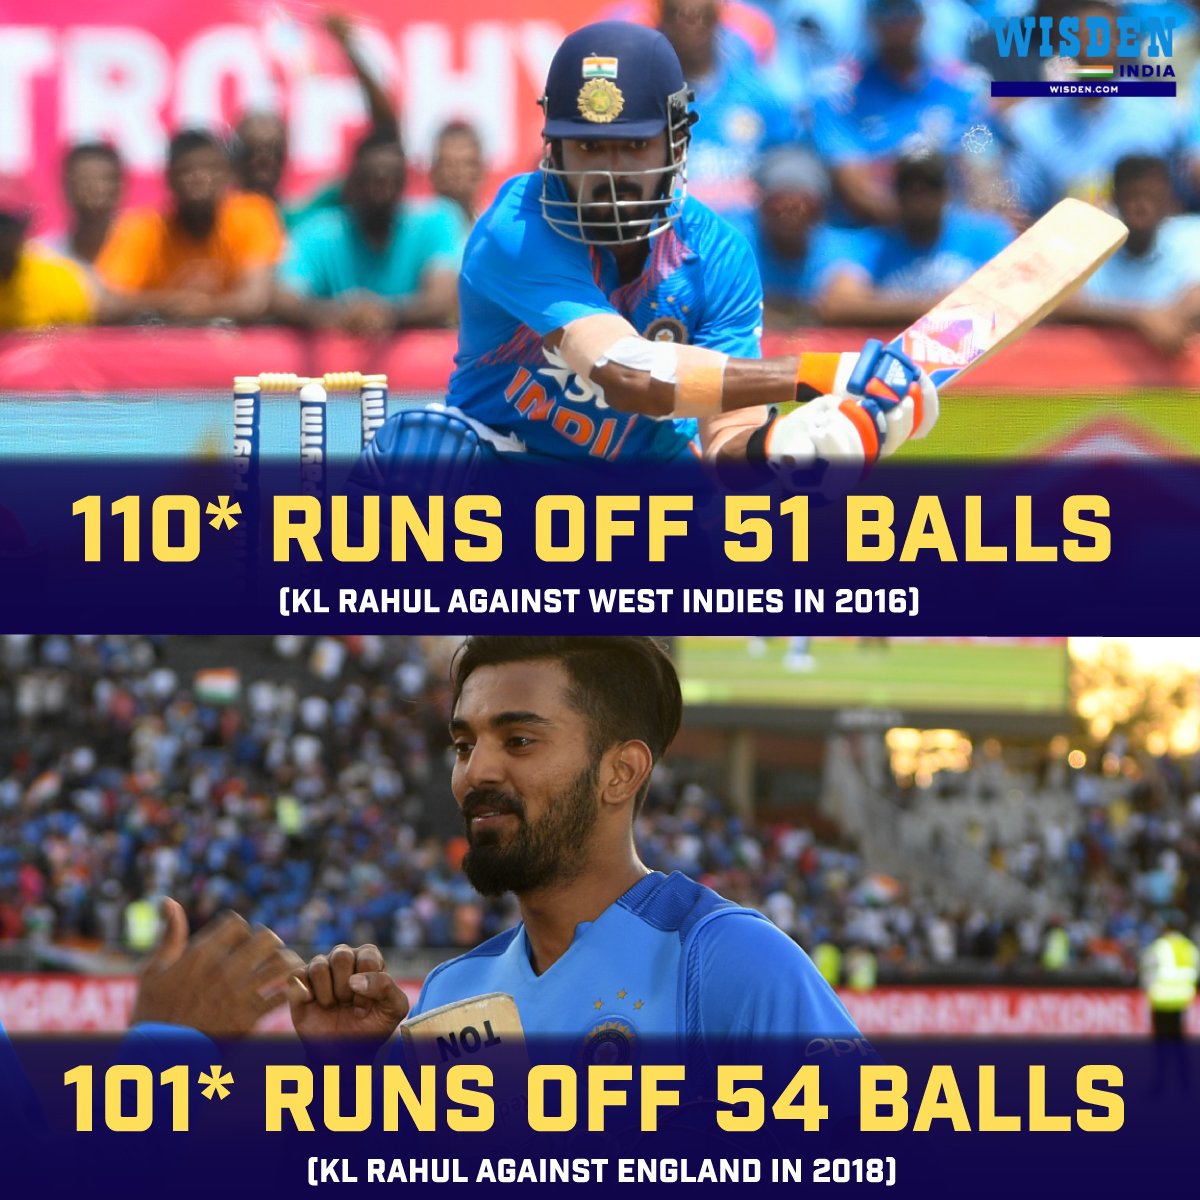 Runs - 110*
Balls - 51
Fours - 12
Sixes - 5
SR - 215.68

#OnThisDay in 2016, KL Rahul smashed his first T20I hundred 🔥

#KLRahul #India #WIvsIND #Cricket #T20Is